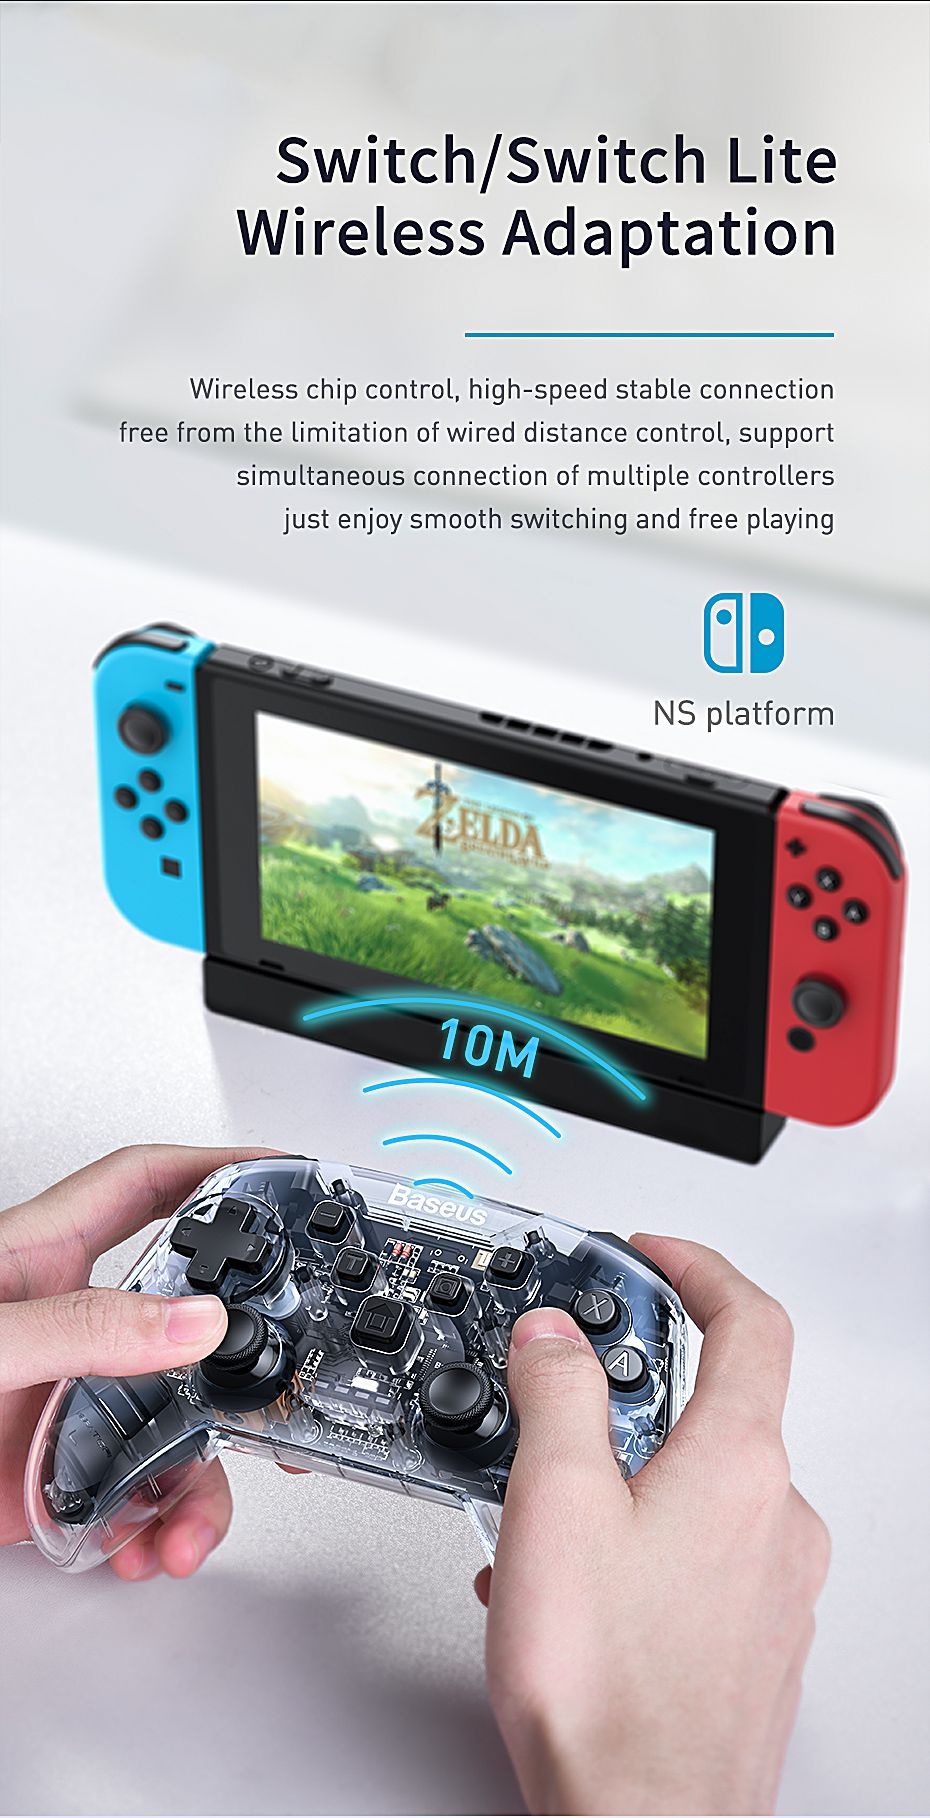 Baseus-Wireless-Bluetooth-Joystick-Controller-Remote-Gamepad-For-Nintend-Switch-Console-For-NS-Switc-1643929